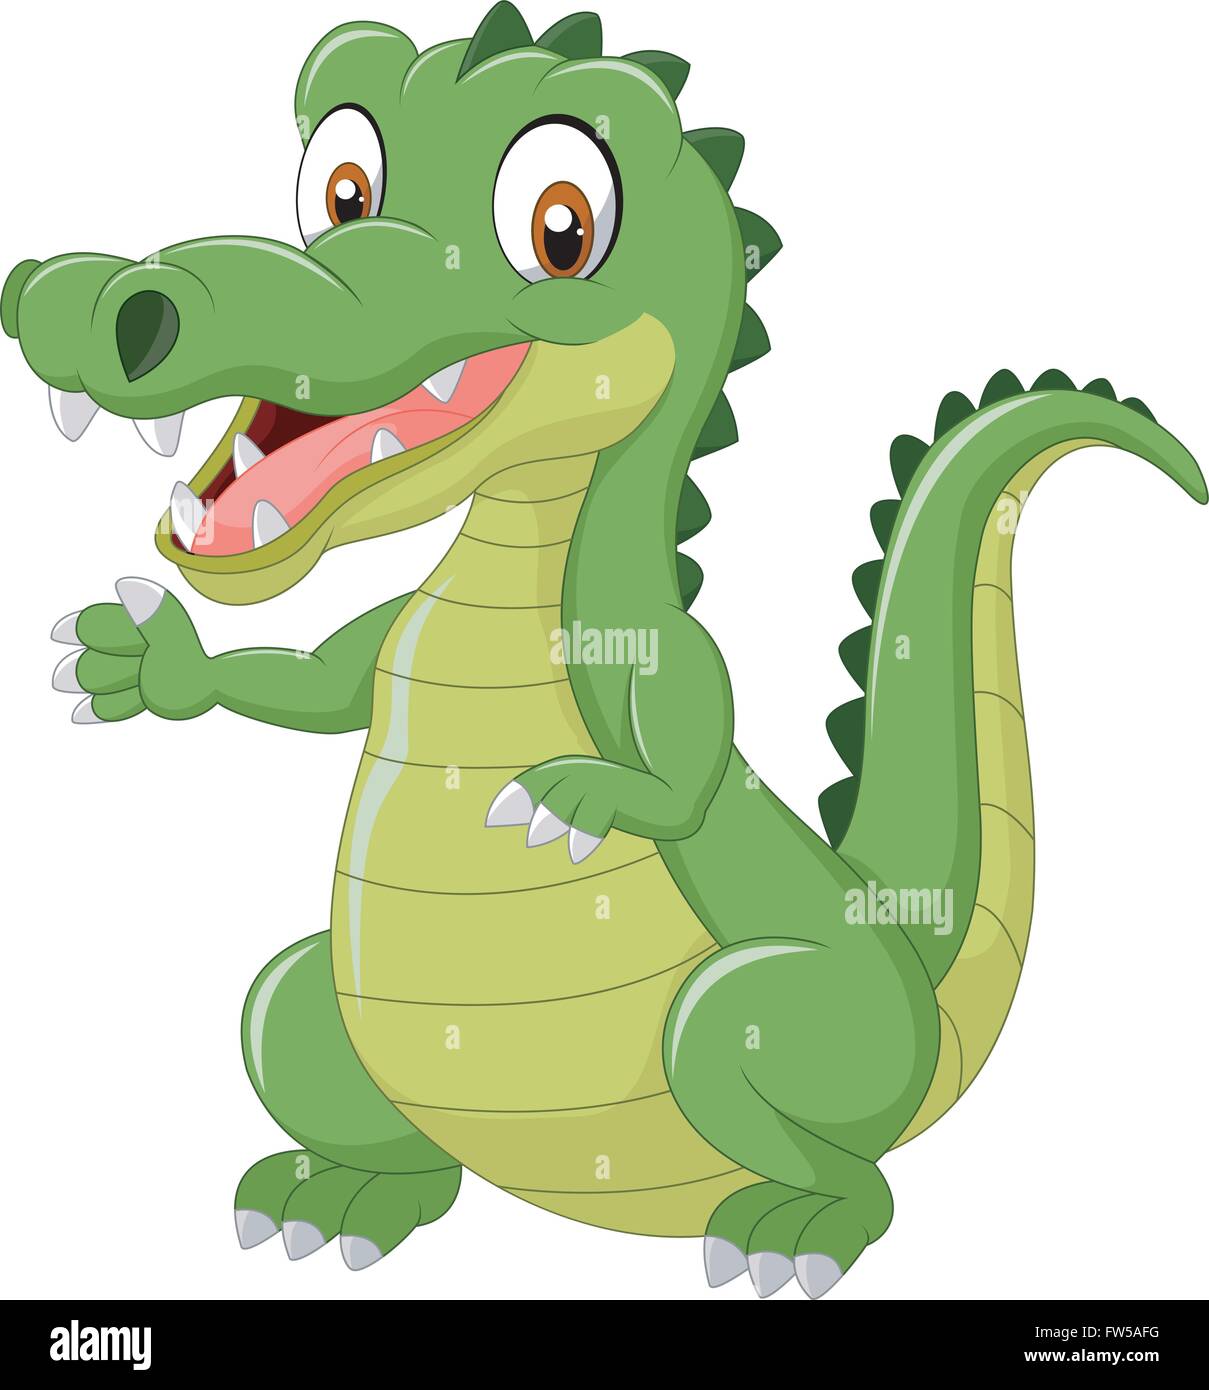 Funny crocodile standing and posing with hand waving Stock Vector